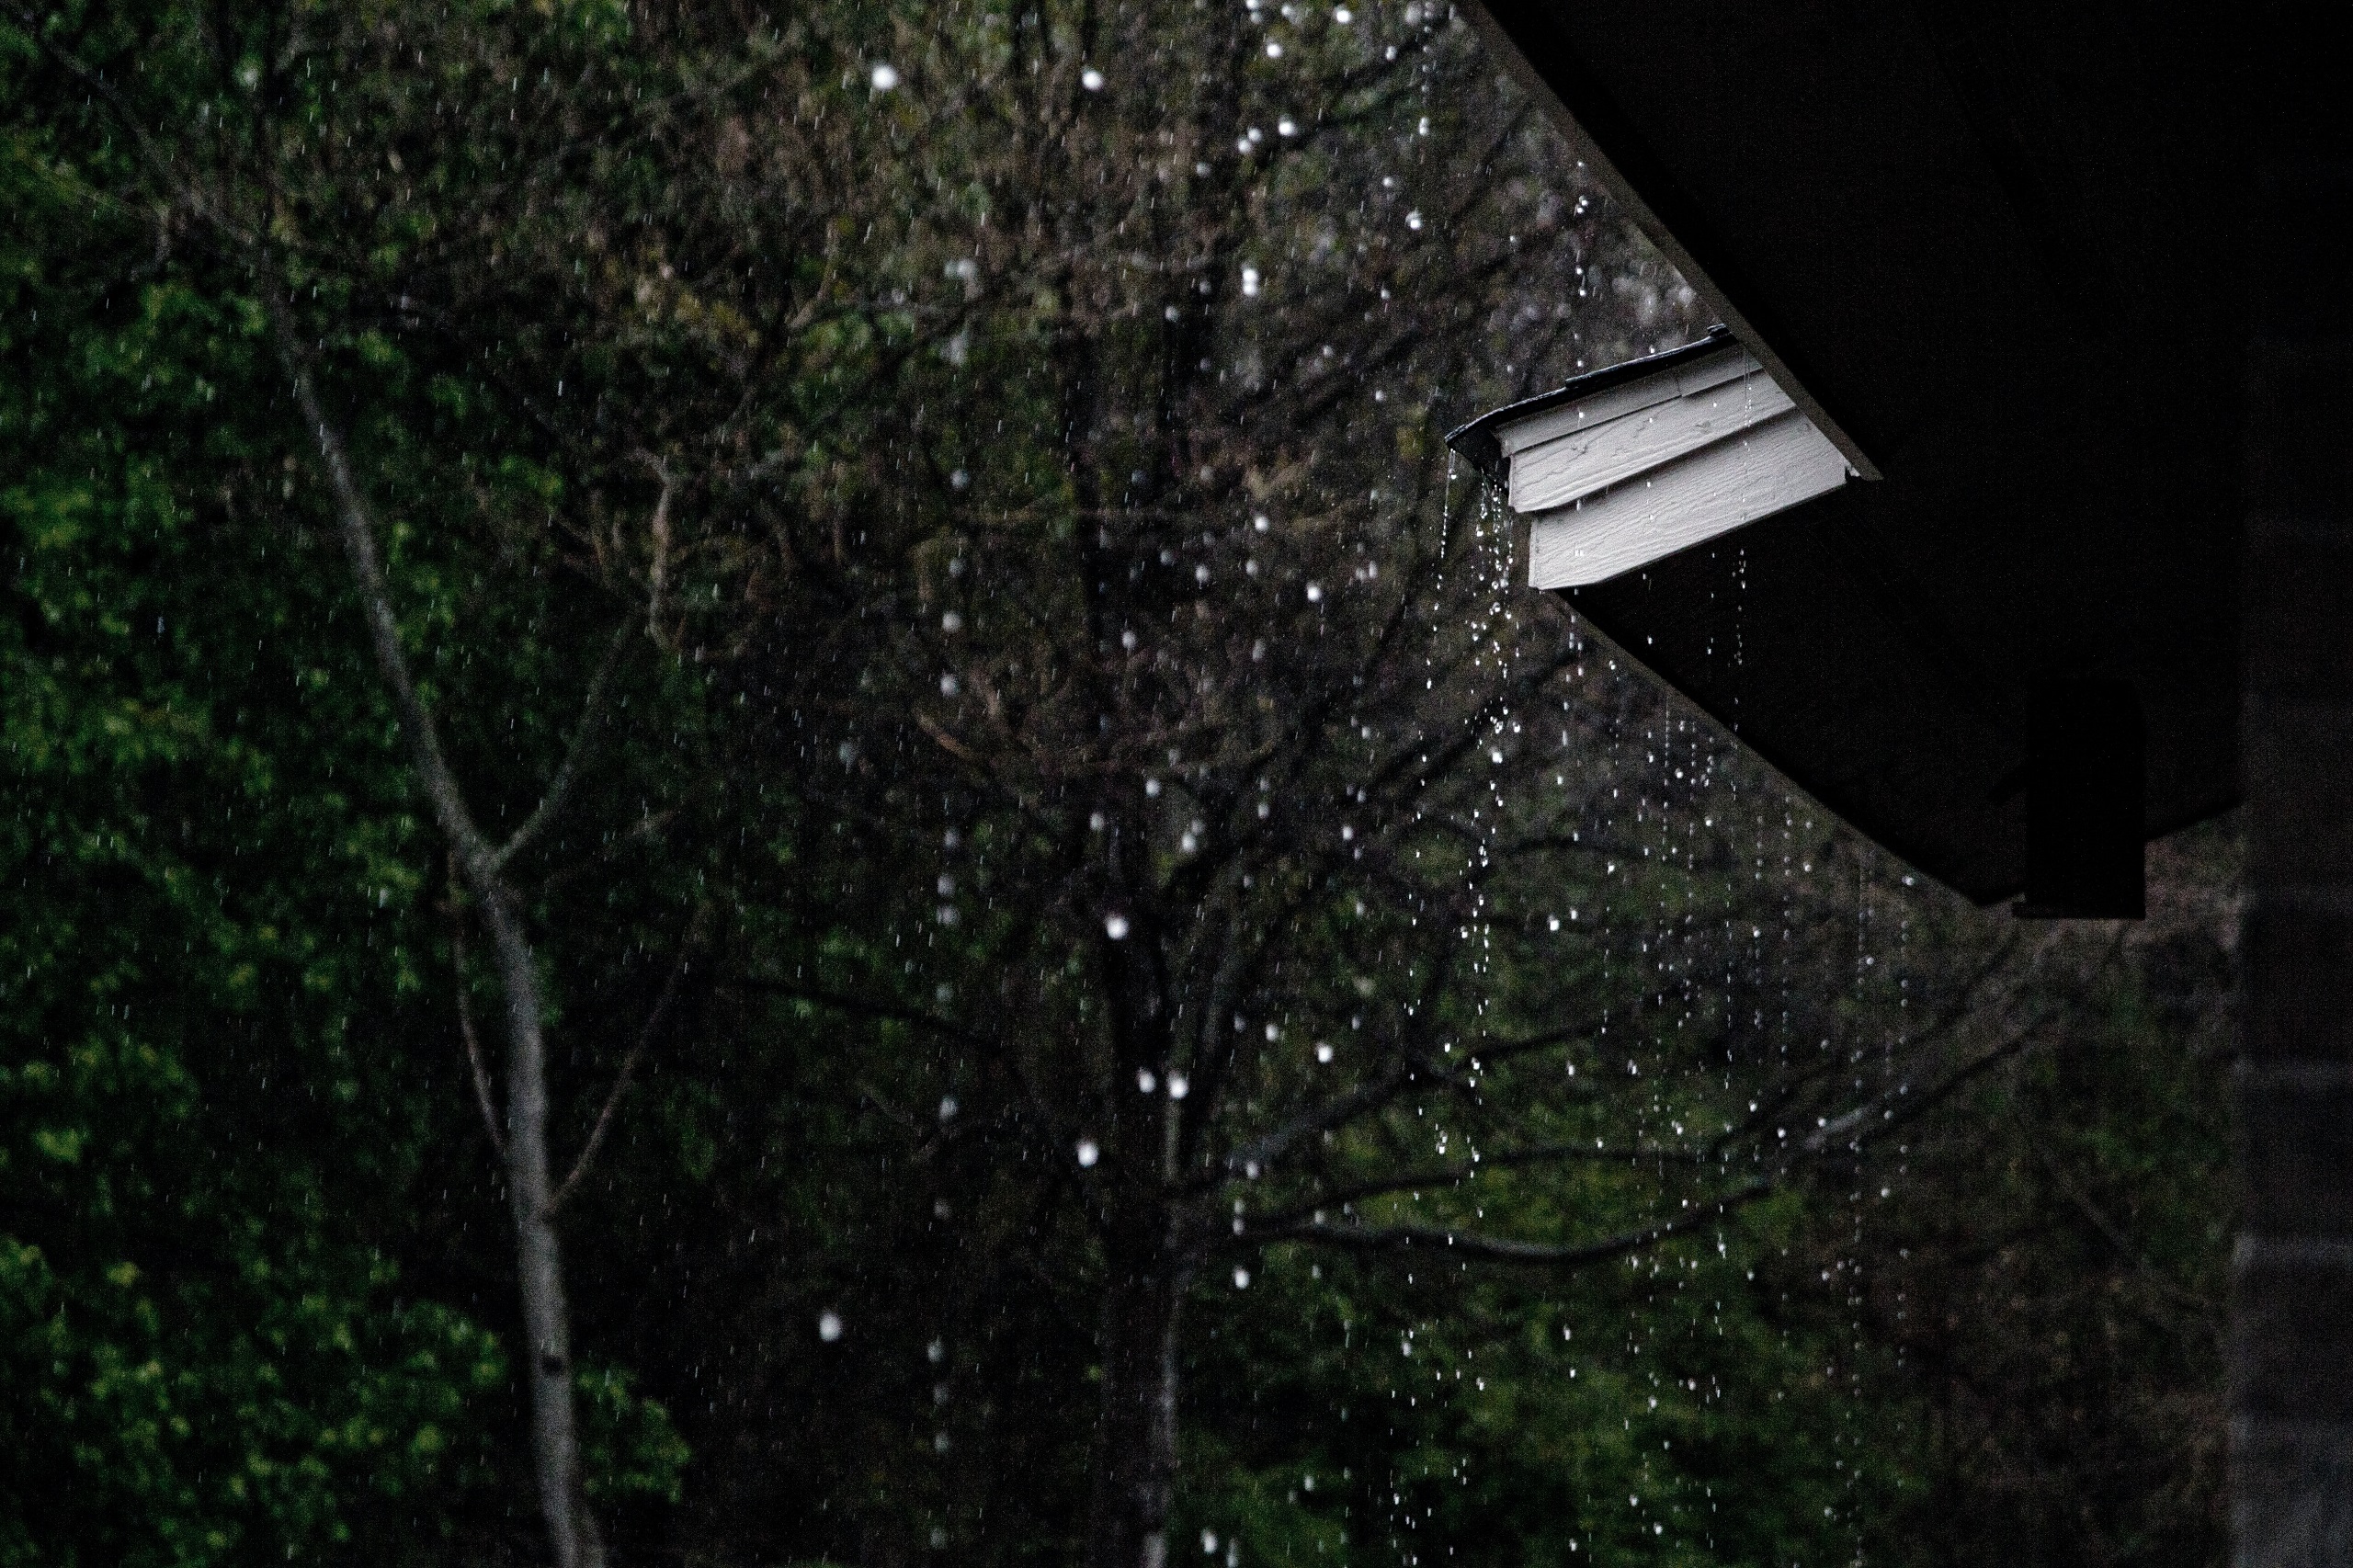 Rain falls outside a house in the woods